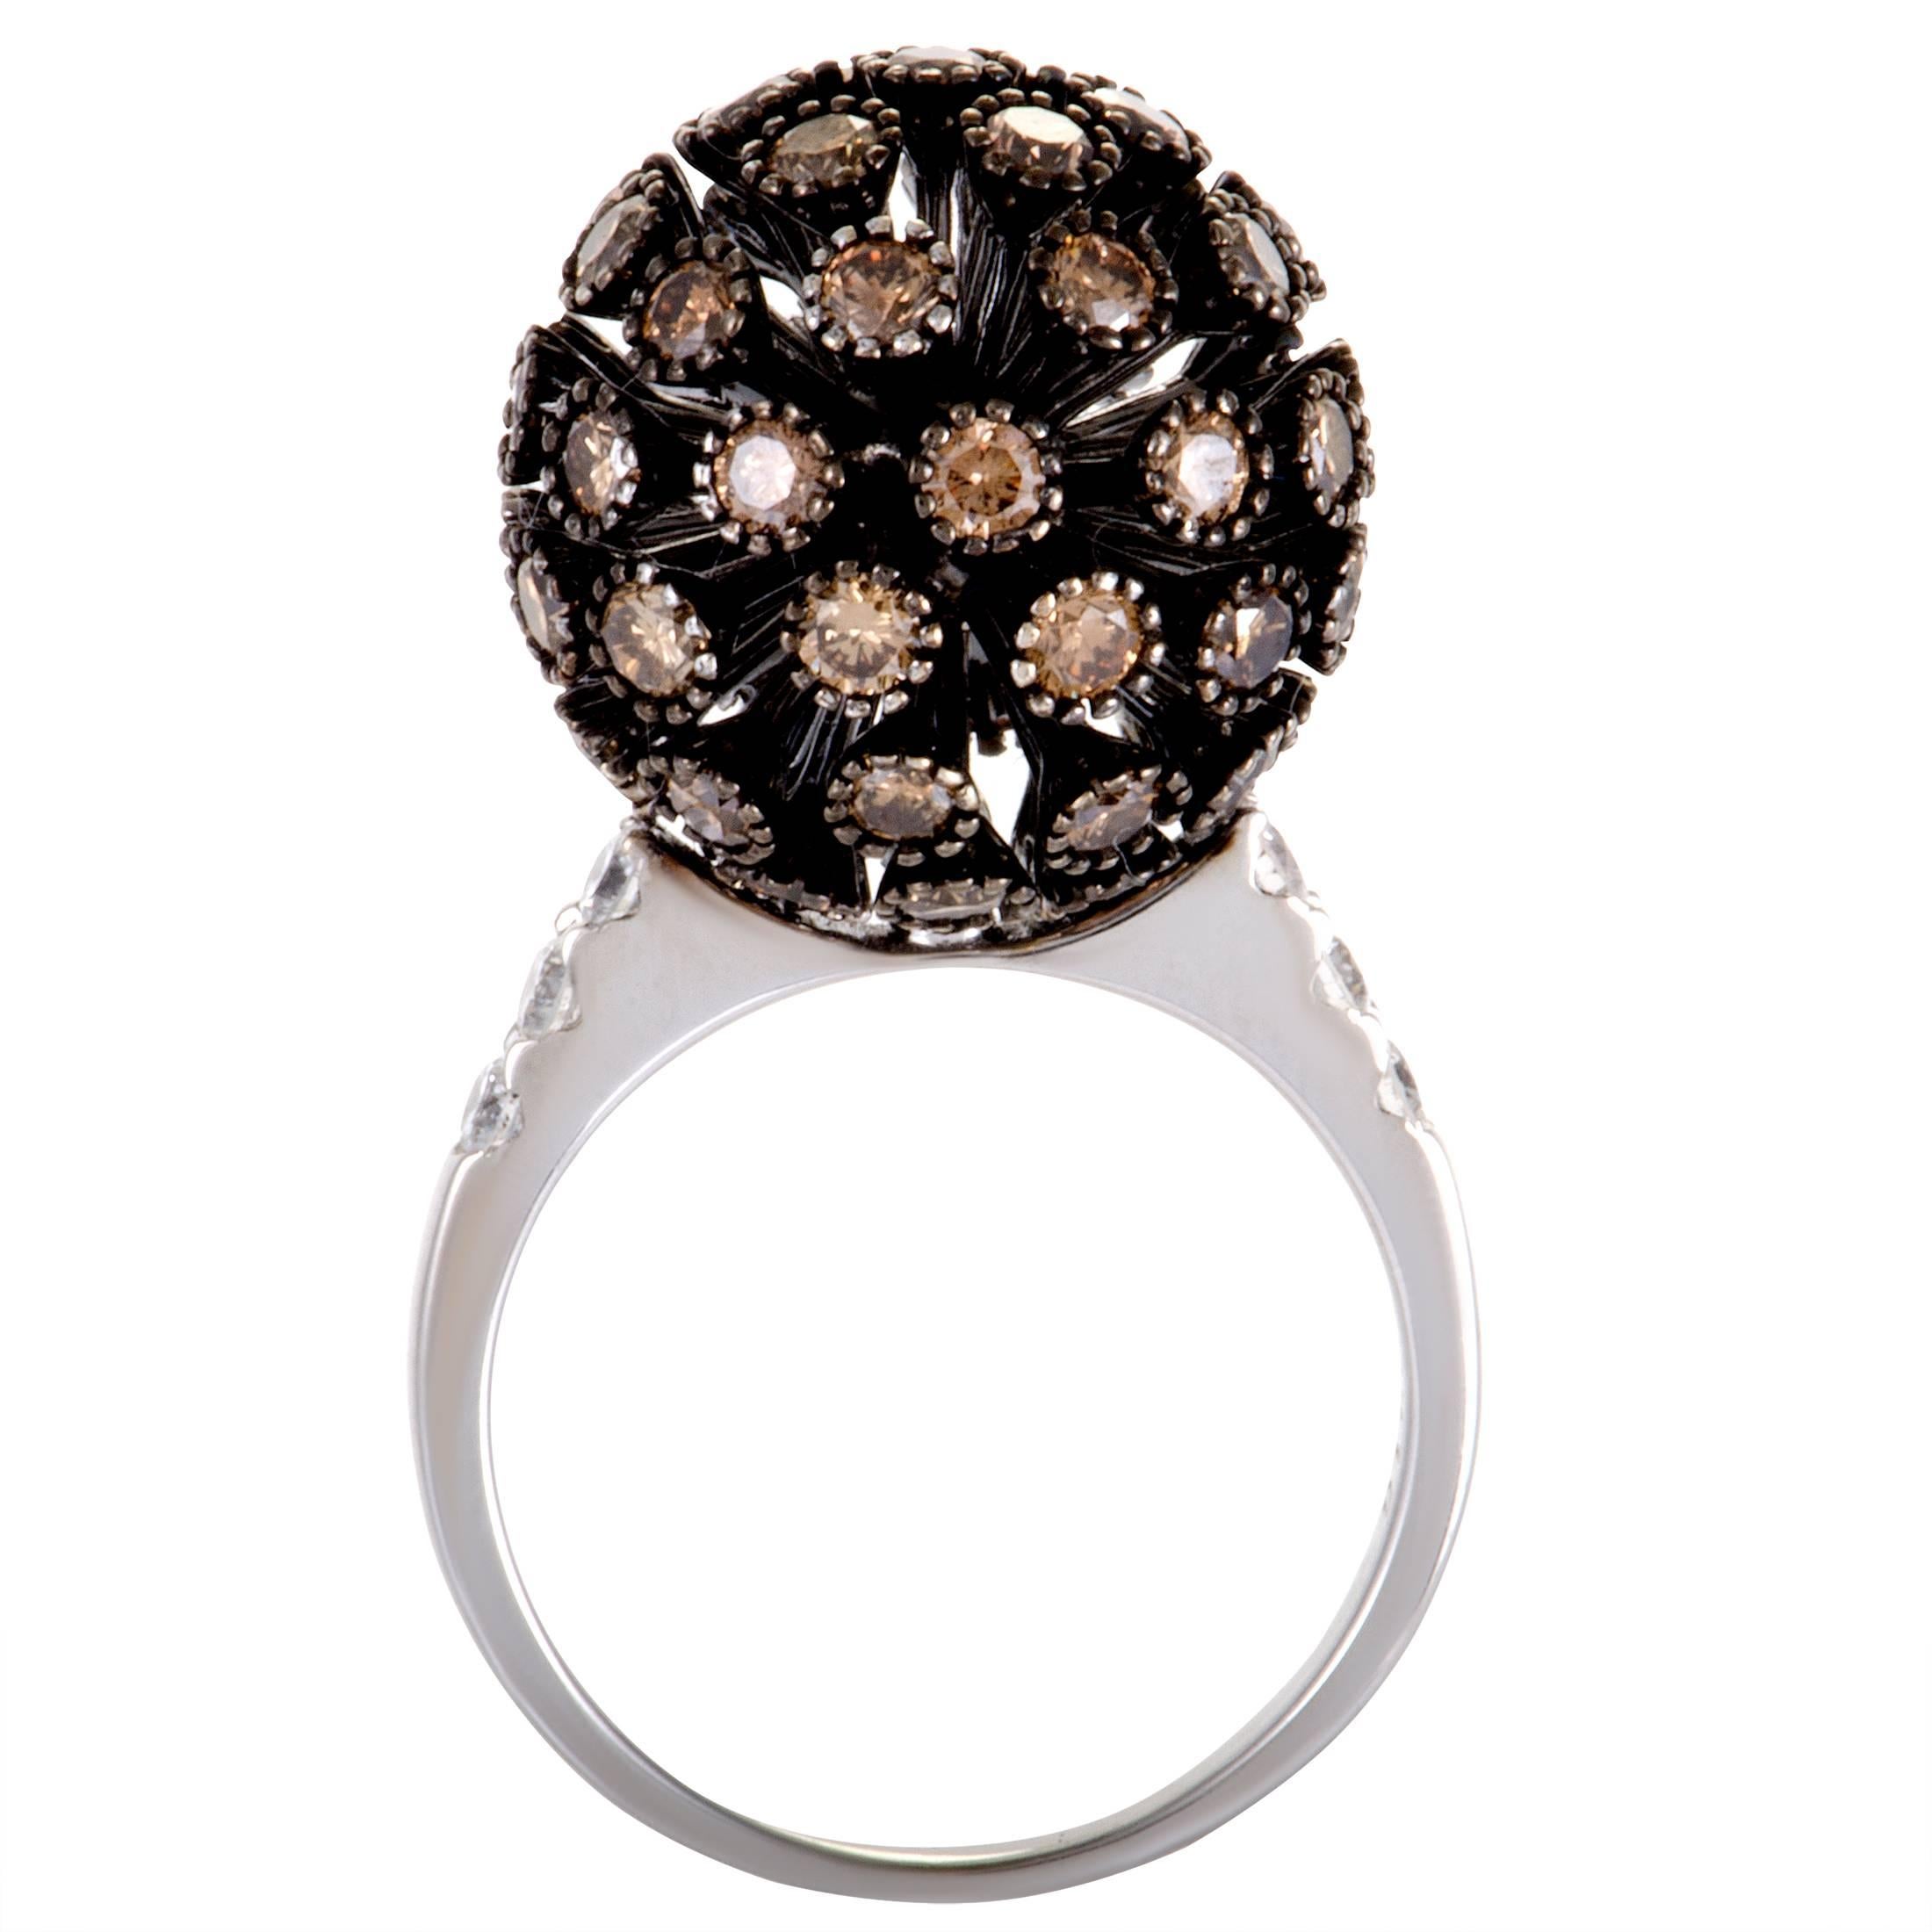 A compelling twist is given to this eye-catching ring with black rhodium plating, making it a piece of exceptional aesthetic allure. The ring is made of 18K white gold and embellished with diamonds that weigh in total 3.52 carats.
Ring Size: